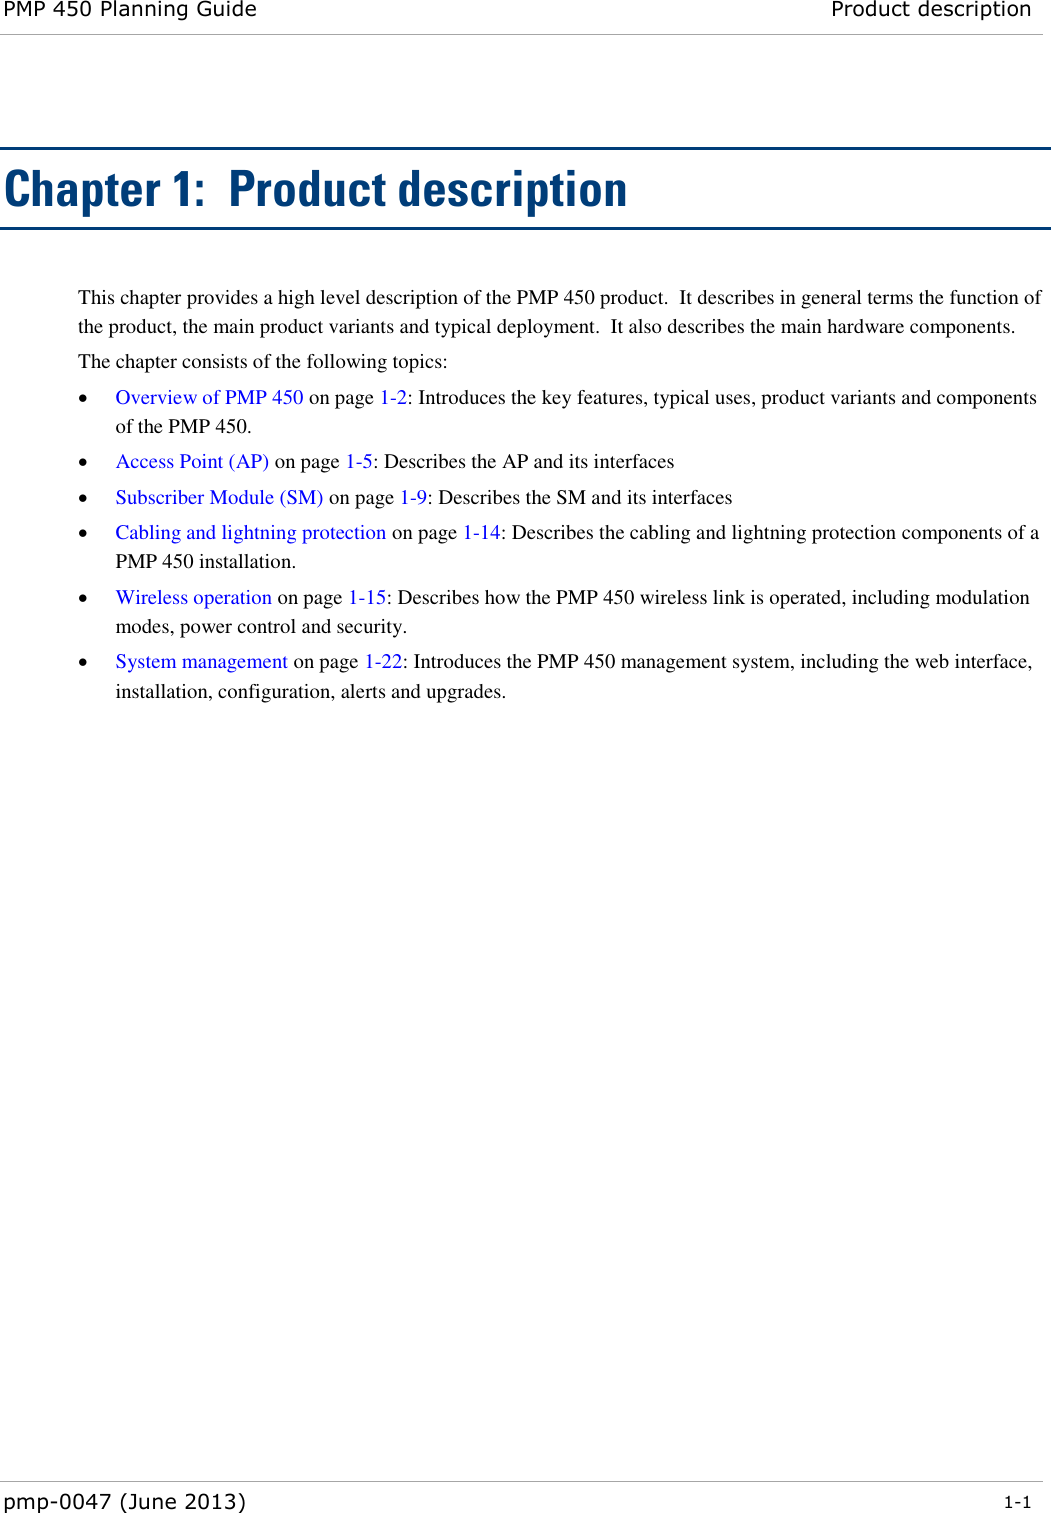 PMP 450 Planning Guide Product description  pmp-0047 (June 2013)  1-1  Chapter 1:  Product description This chapter provides a high level description of the PMP 450 product.  It describes in general terms the function of the product, the main product variants and typical deployment.  It also describes the main hardware components. The chapter consists of the following topics:  Overview of PMP 450 on page 1-2: Introduces the key features, typical uses, product variants and components of the PMP 450.  Access Point (AP) on page 1-5: Describes the AP and its interfaces   Subscriber Module (SM) on page 1-9: Describes the SM and its interfaces  Cabling and lightning protection on page 1-14: Describes the cabling and lightning protection components of a PMP 450 installation.  Wireless operation on page 1-15: Describes how the PMP 450 wireless link is operated, including modulation modes, power control and security.  System management on page 1-22: Introduces the PMP 450 management system, including the web interface, installation, configuration, alerts and upgrades.  